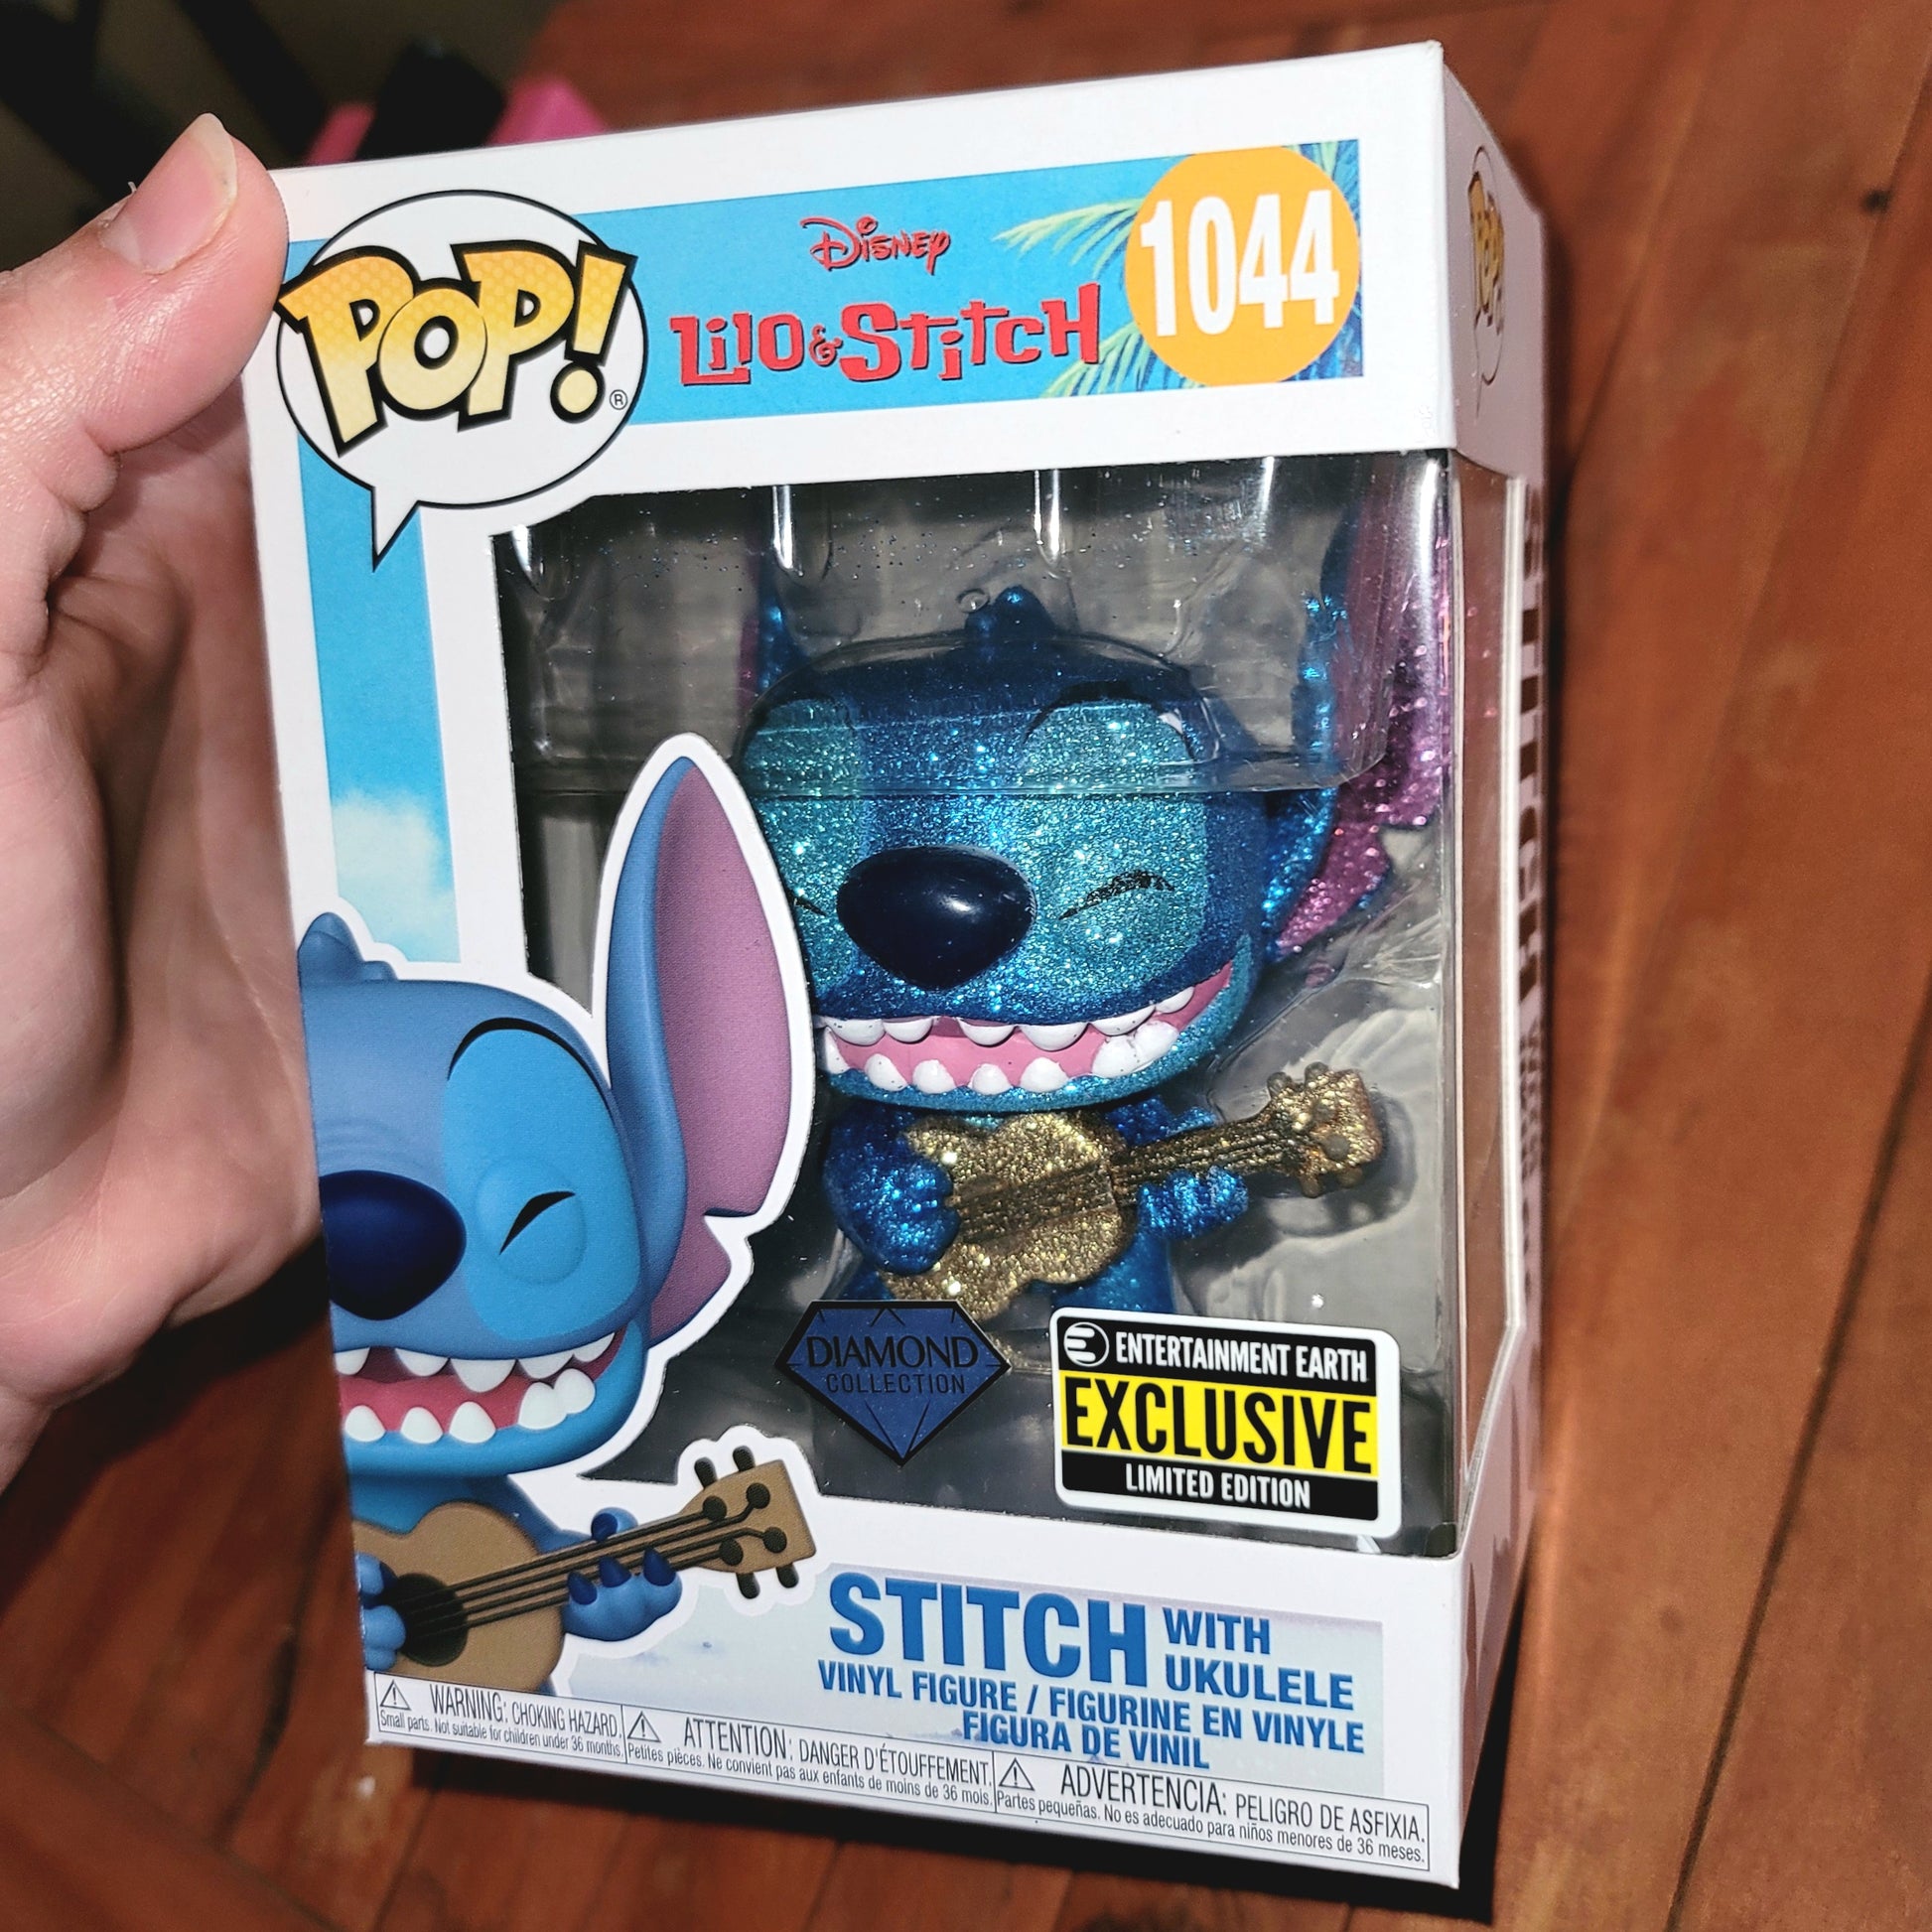 Funko POP!: Lilo & Stitch - EE Excl Stitch with Ukulele (1044) Diamond  Glitter 3.75 Inch Funko POP! sold by Stronghold Collectibles